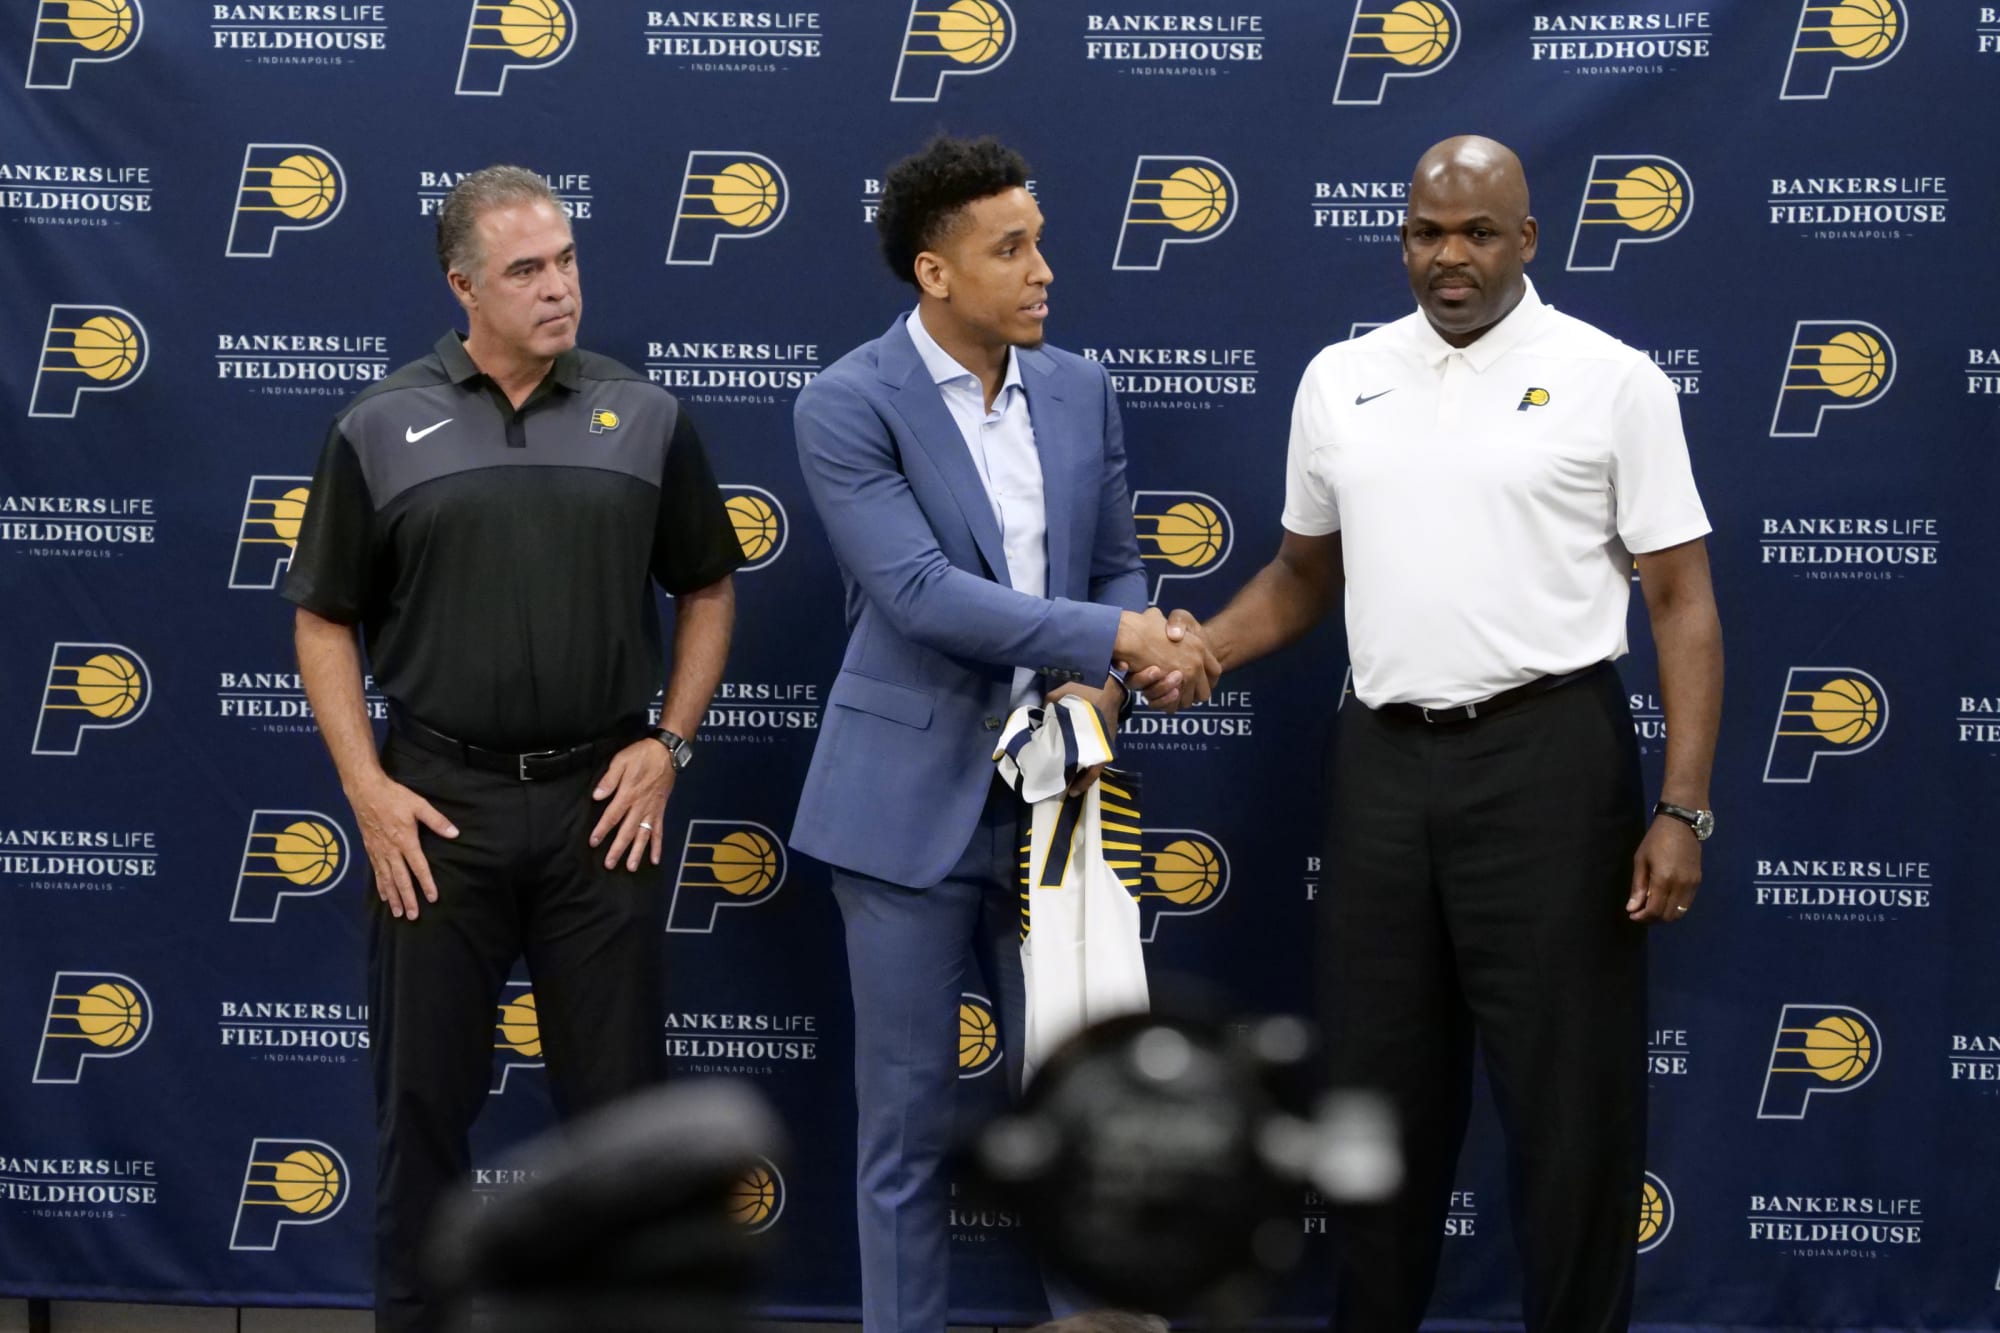 Grading the Indiana Pacers' offseason moves so far